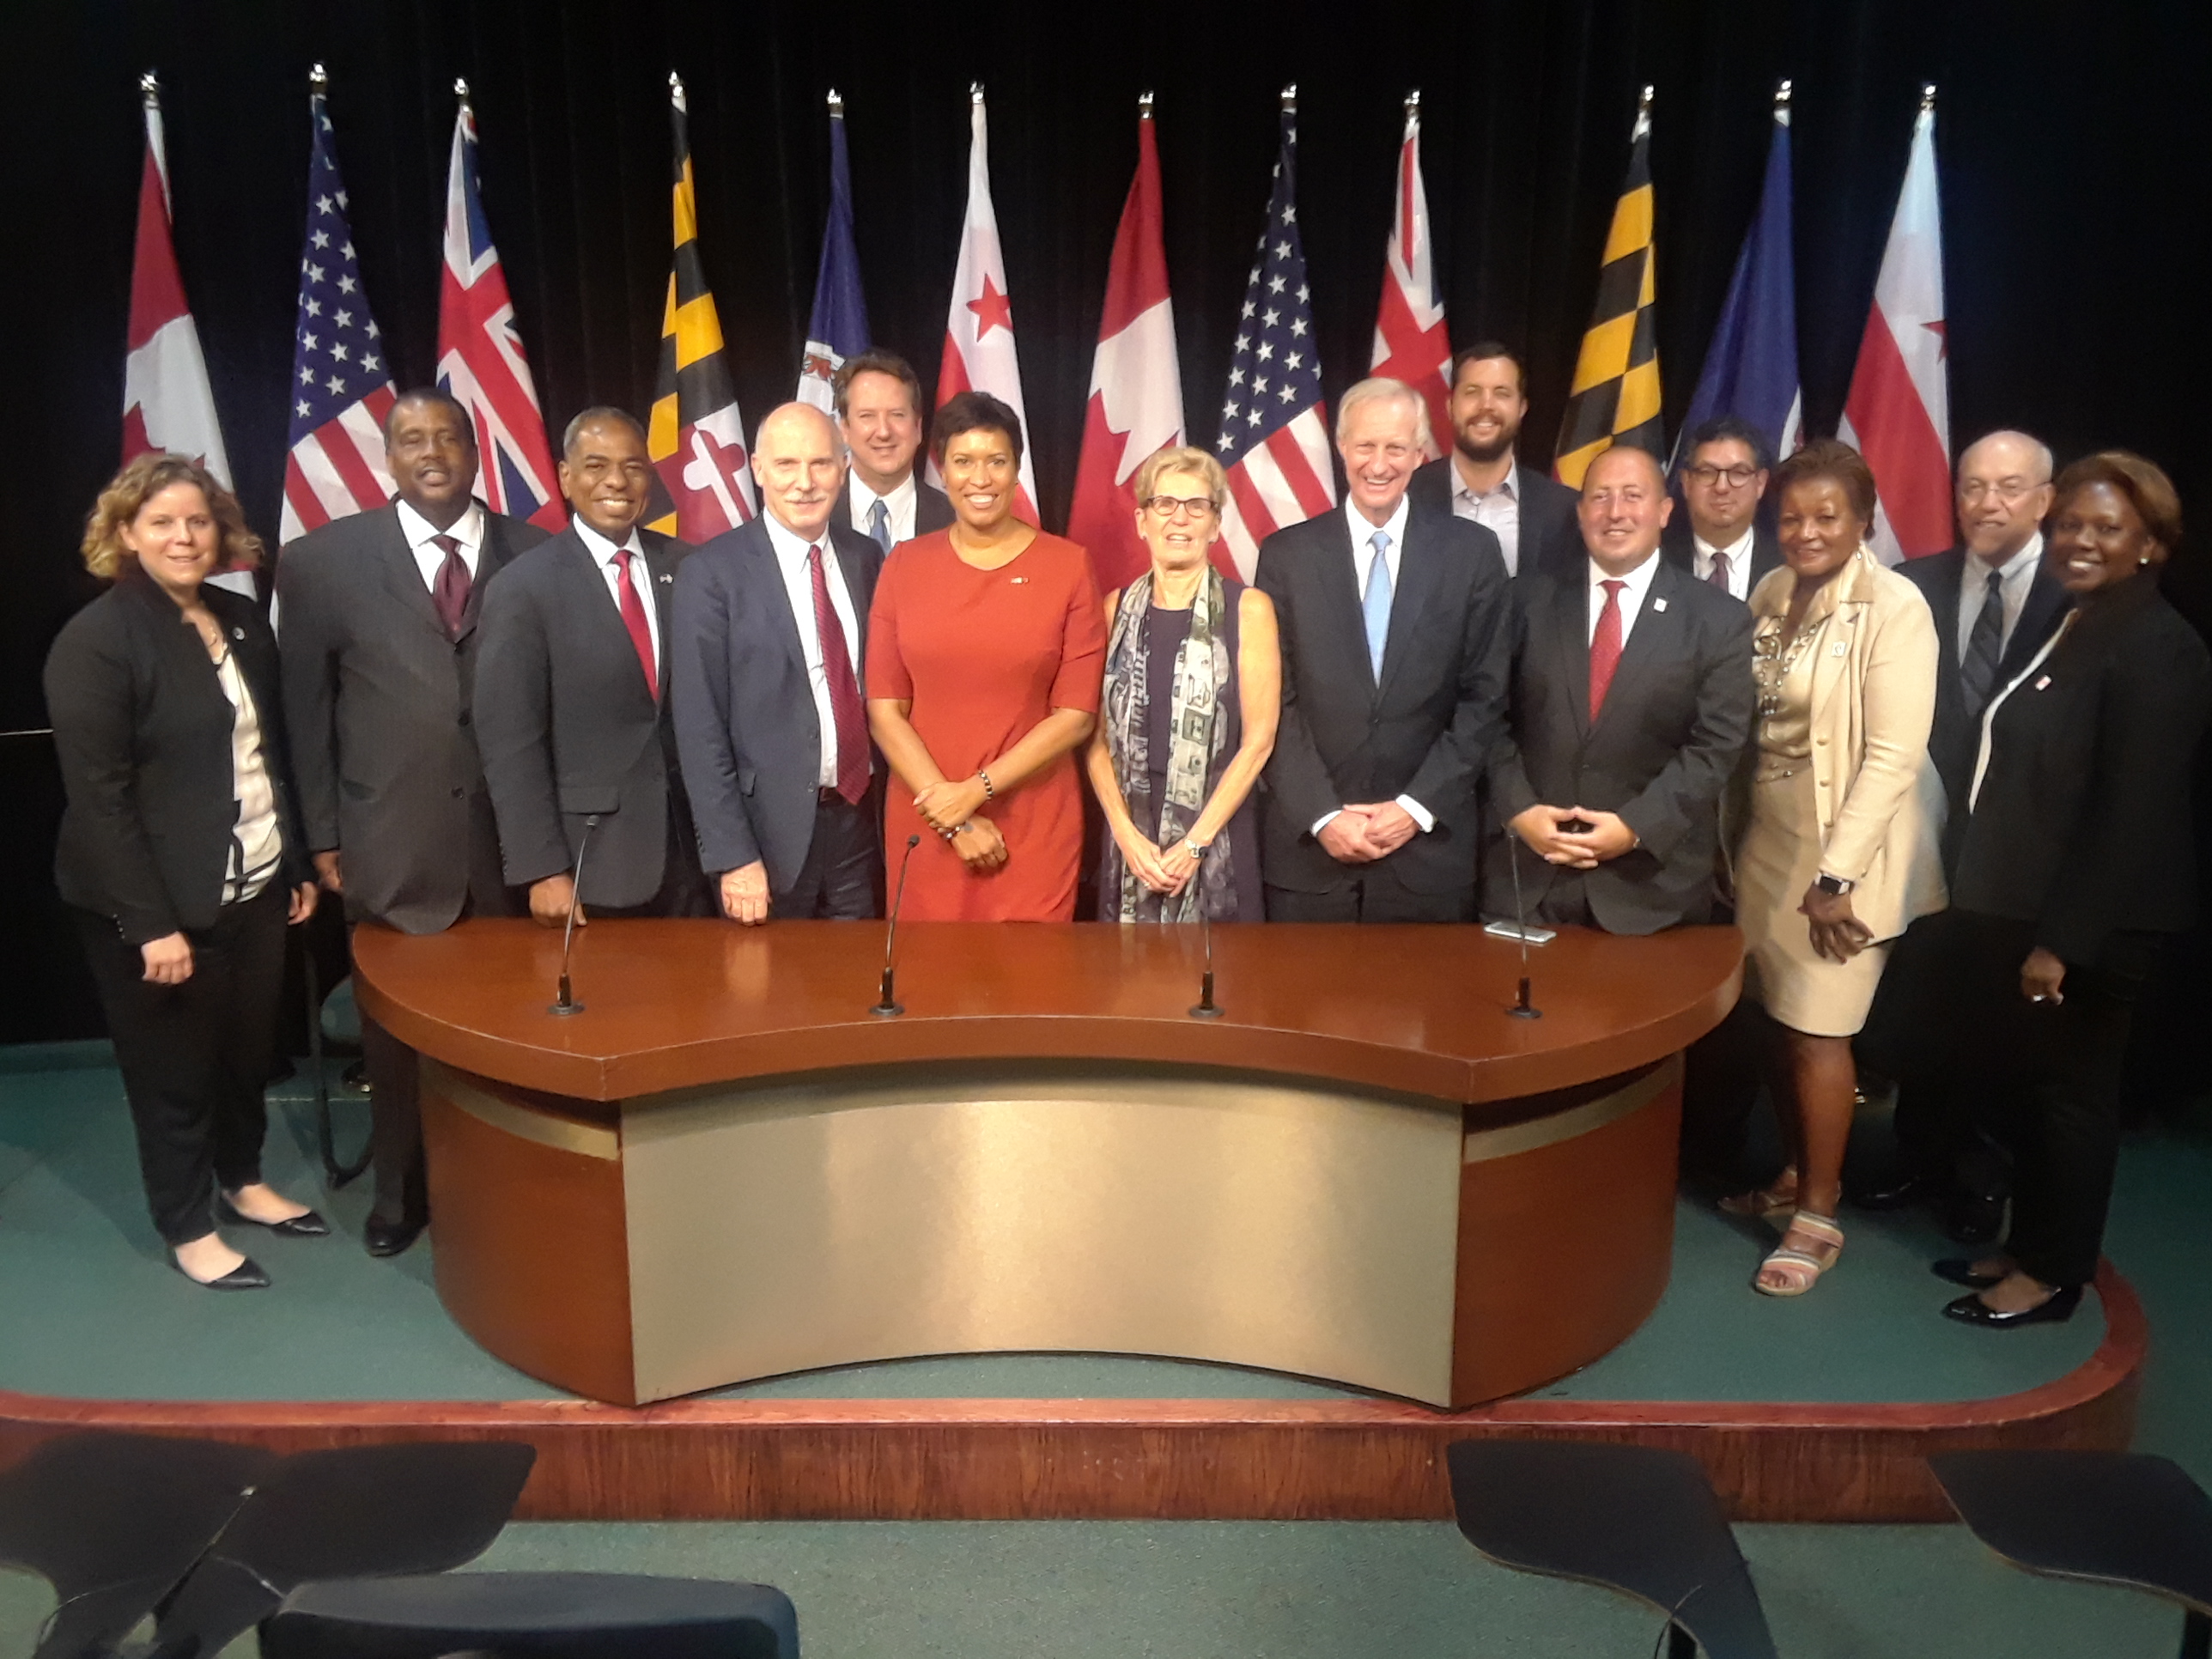 Warner Session with Mayor Bowser and District of Columbia in Toronto, Canada on trade mission